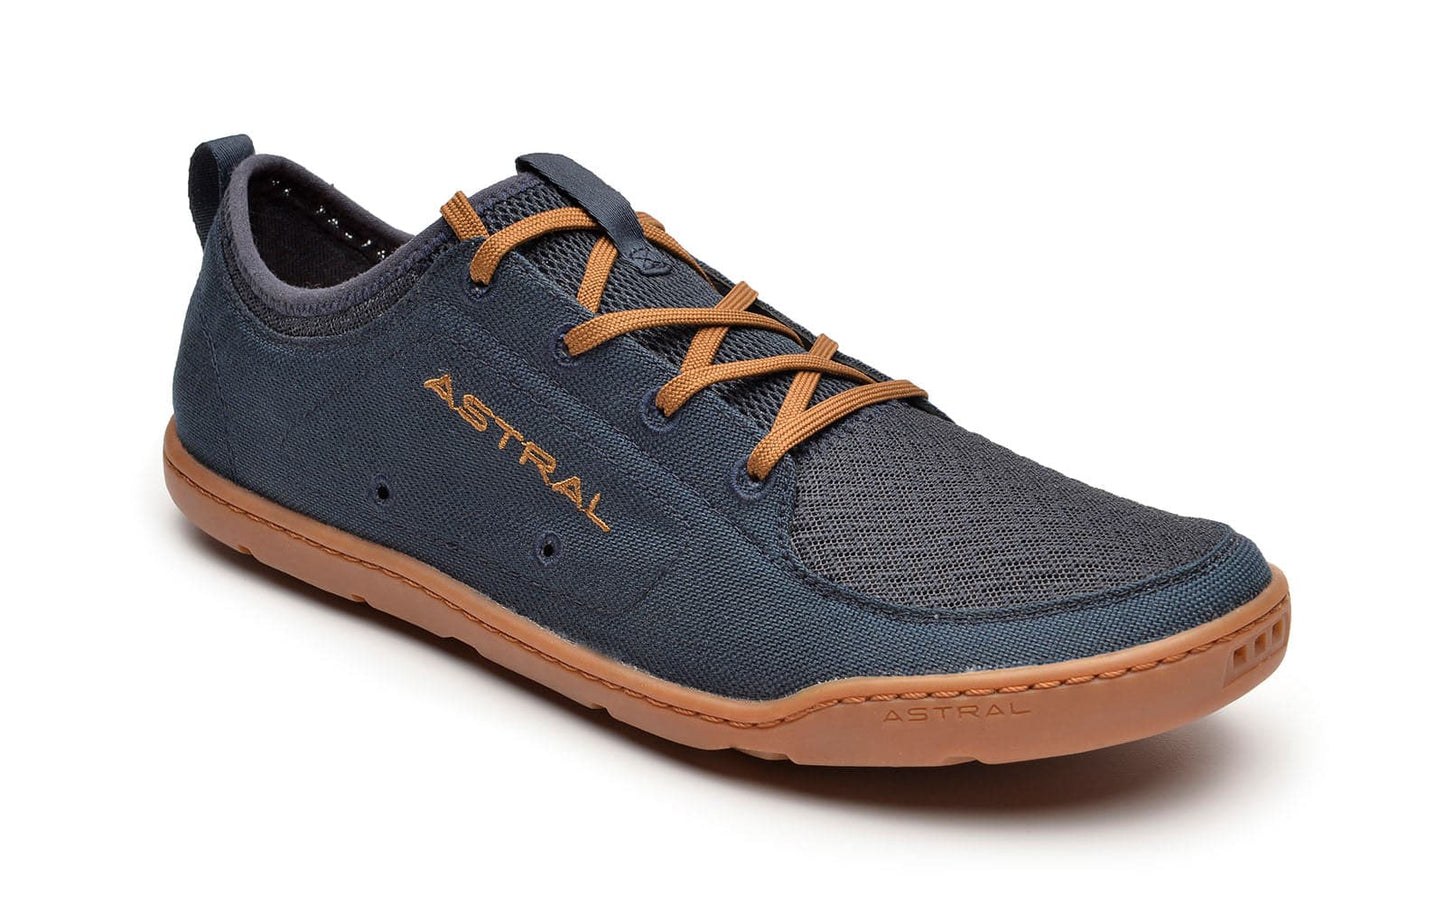 Featuring the Loyak - Men's men's footwear manufactured by Astral shown here from an eleventh angle.